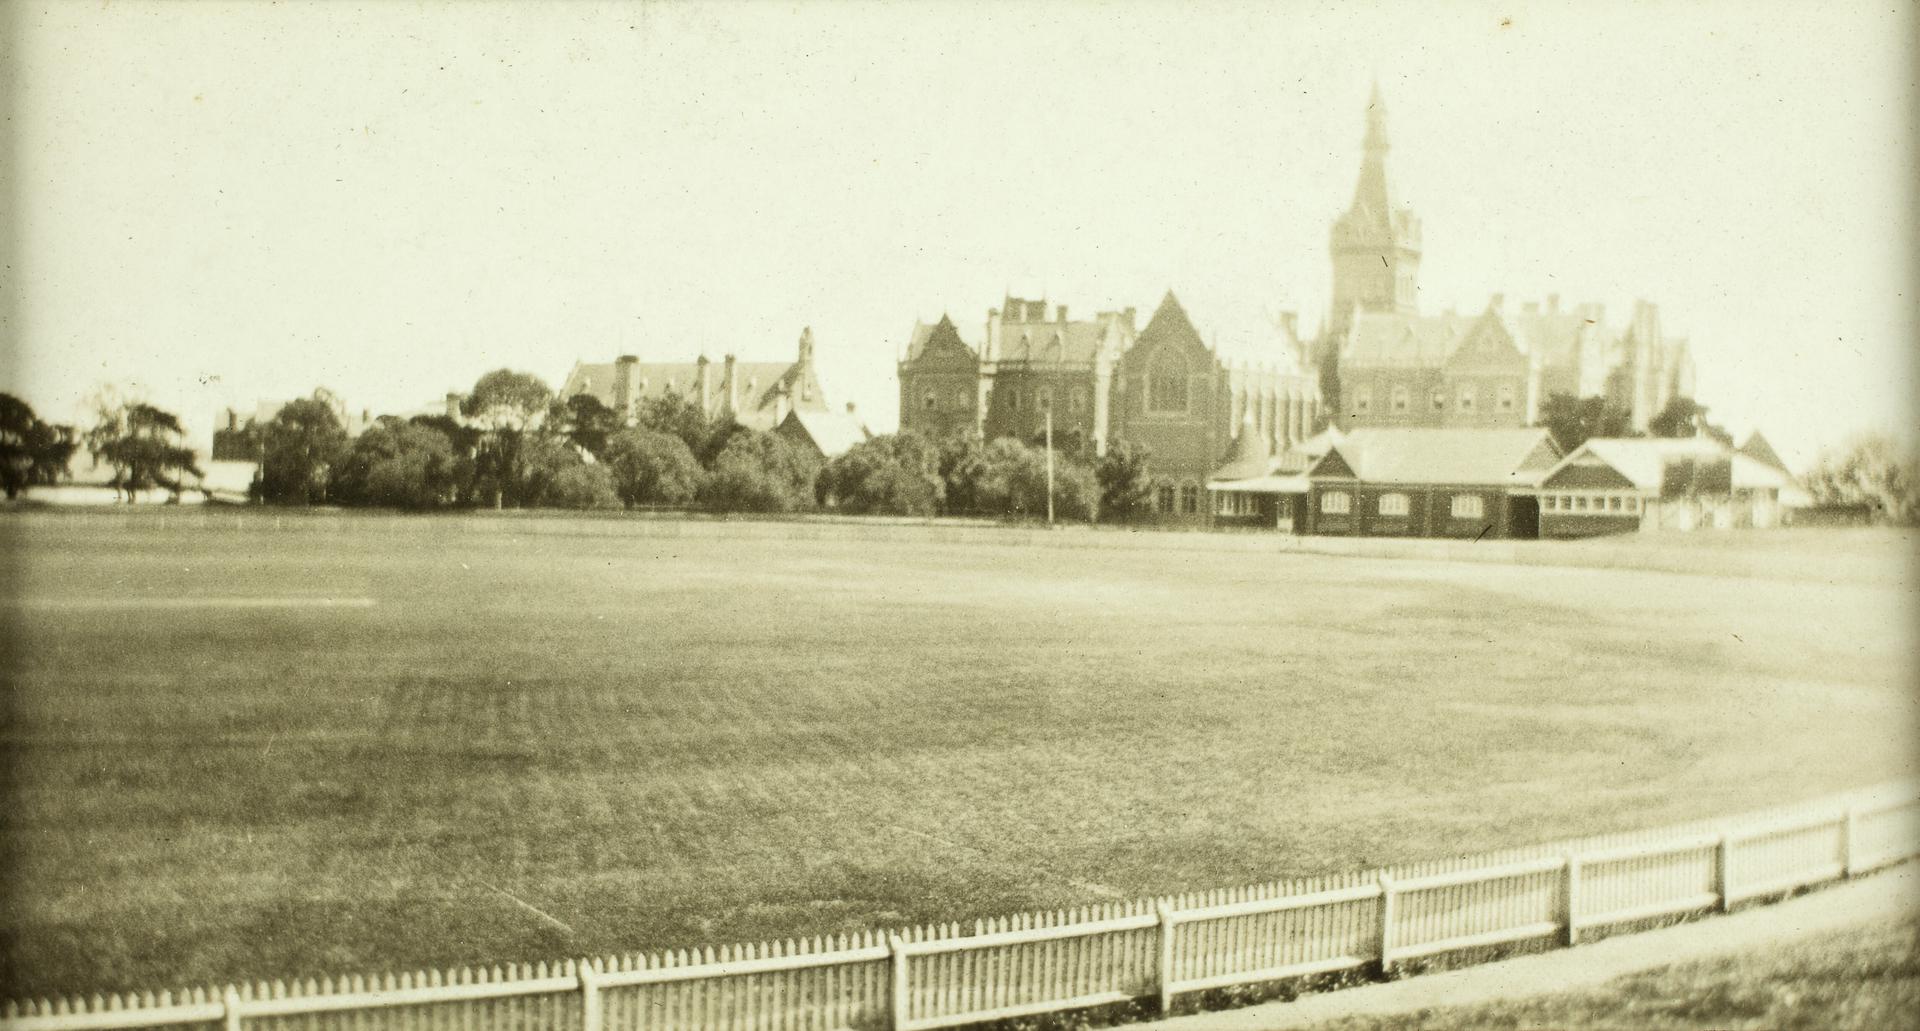 University oval in the 1920s